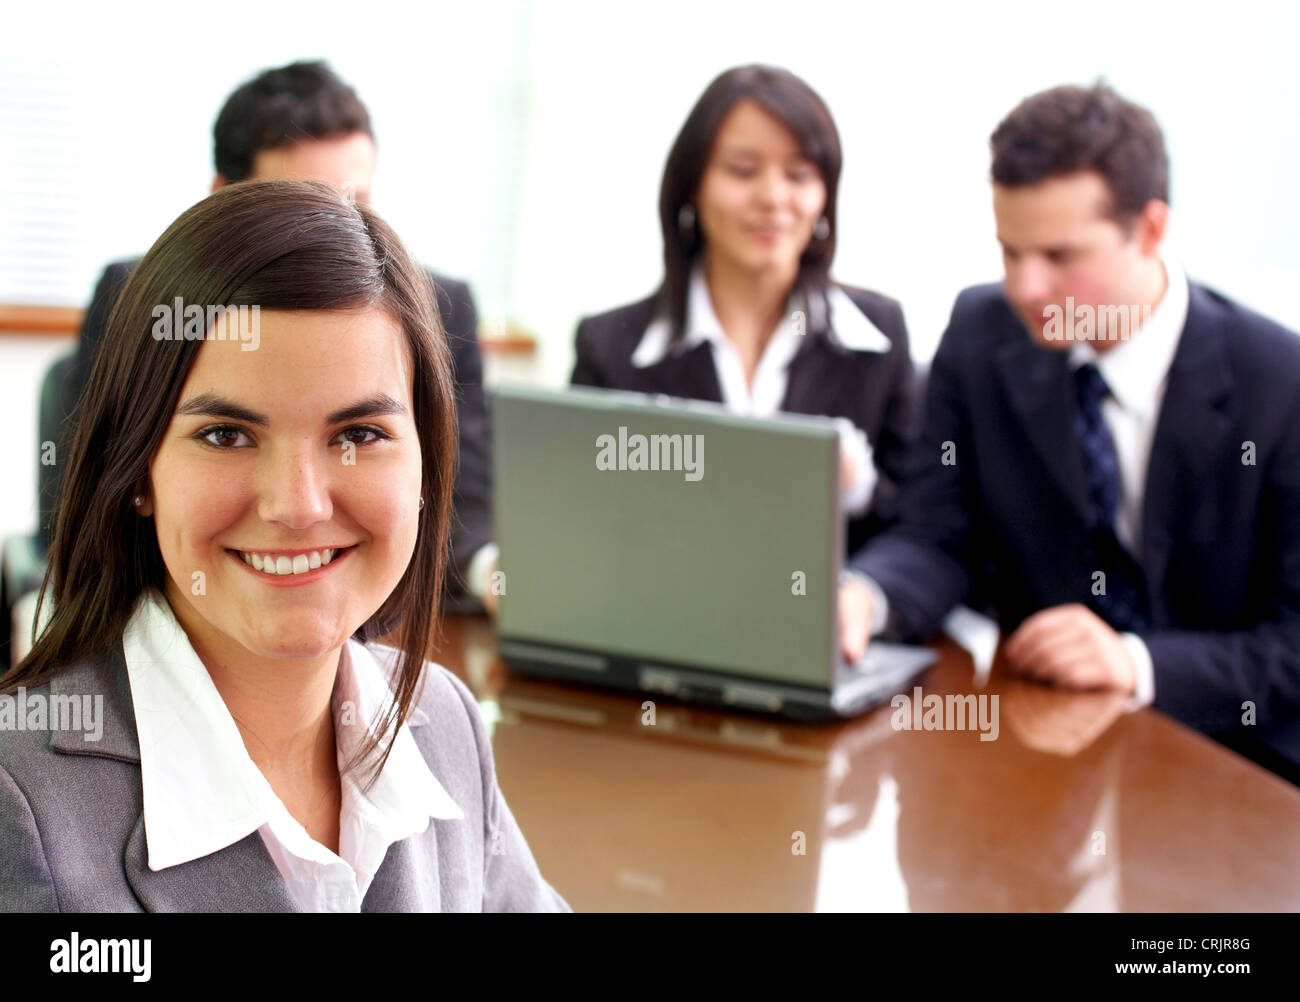 business woman in an office environment with people working behind her Stock Photo